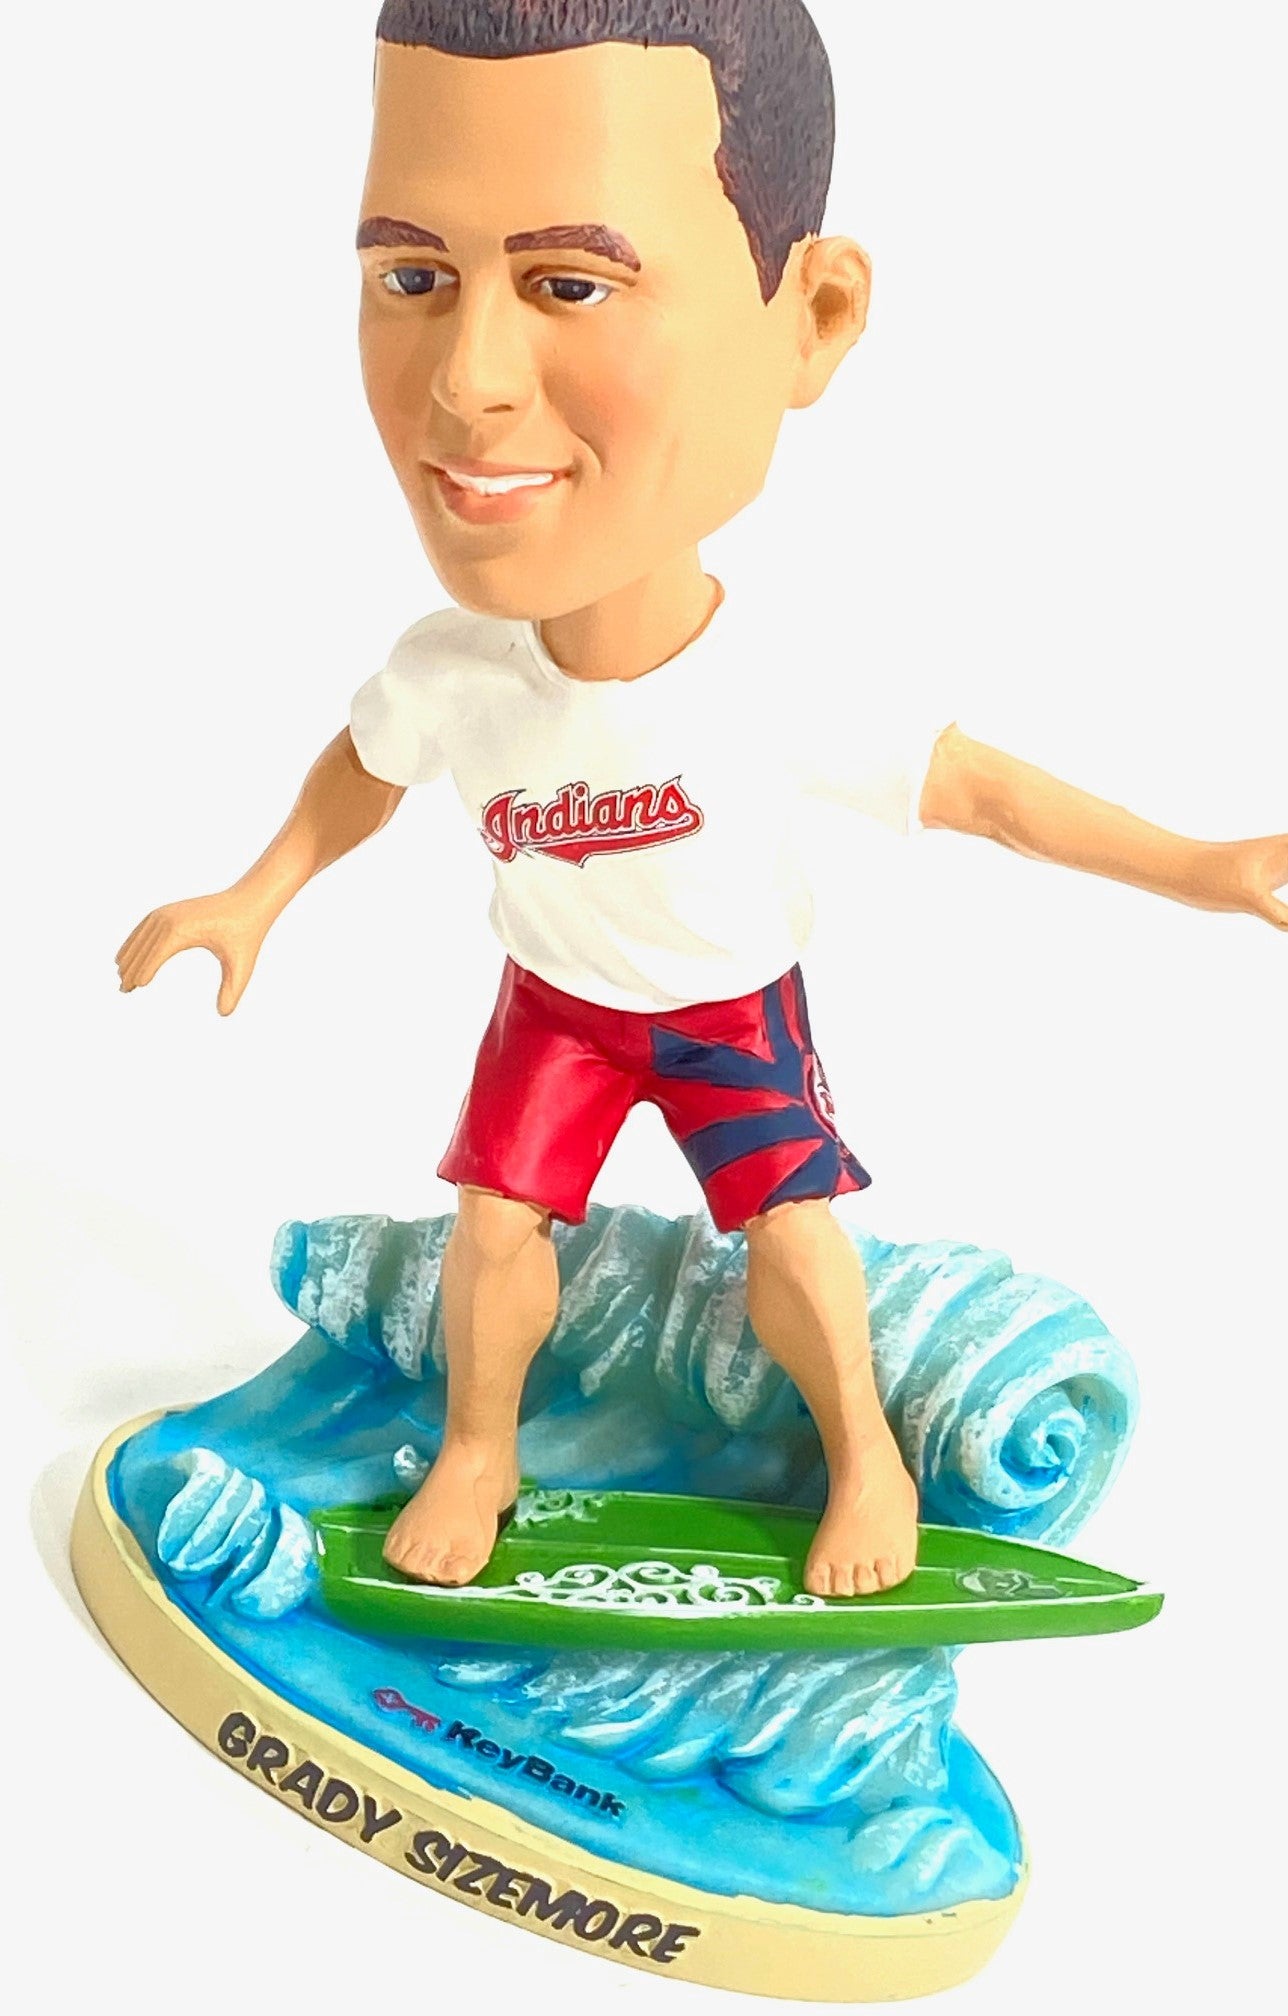 Grady "Surfin" Sizemore 2009 MLB Cleveland Indians Mini-Bobblehead Used By BD&A